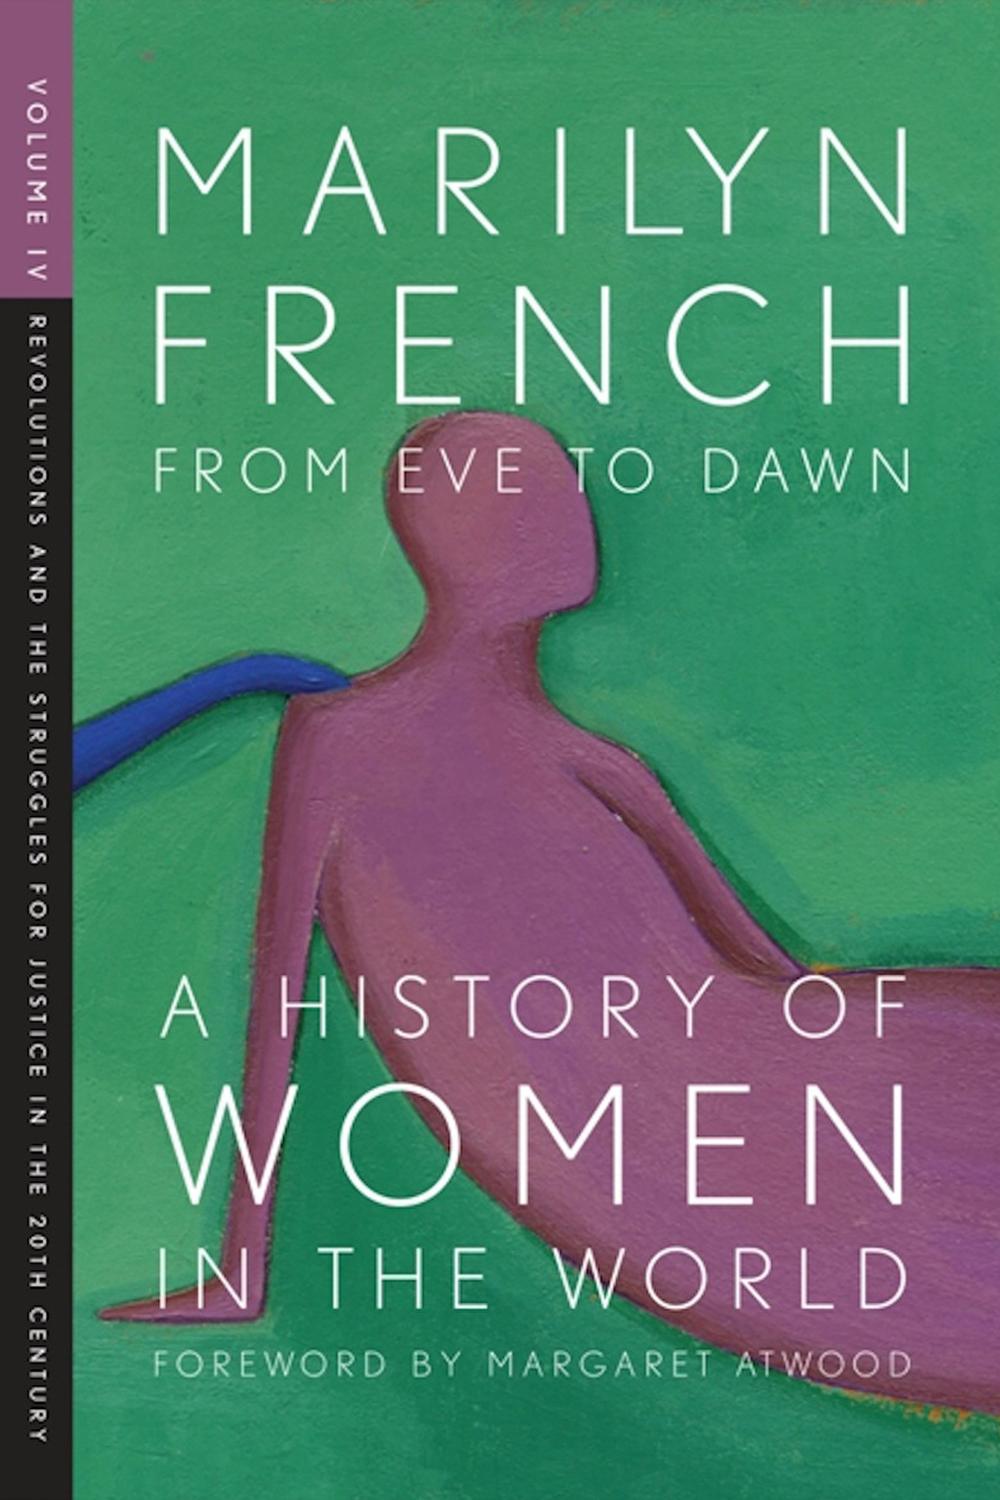 From Eve to Dawn: A History of Women in the World Volume IV - Marilyn French